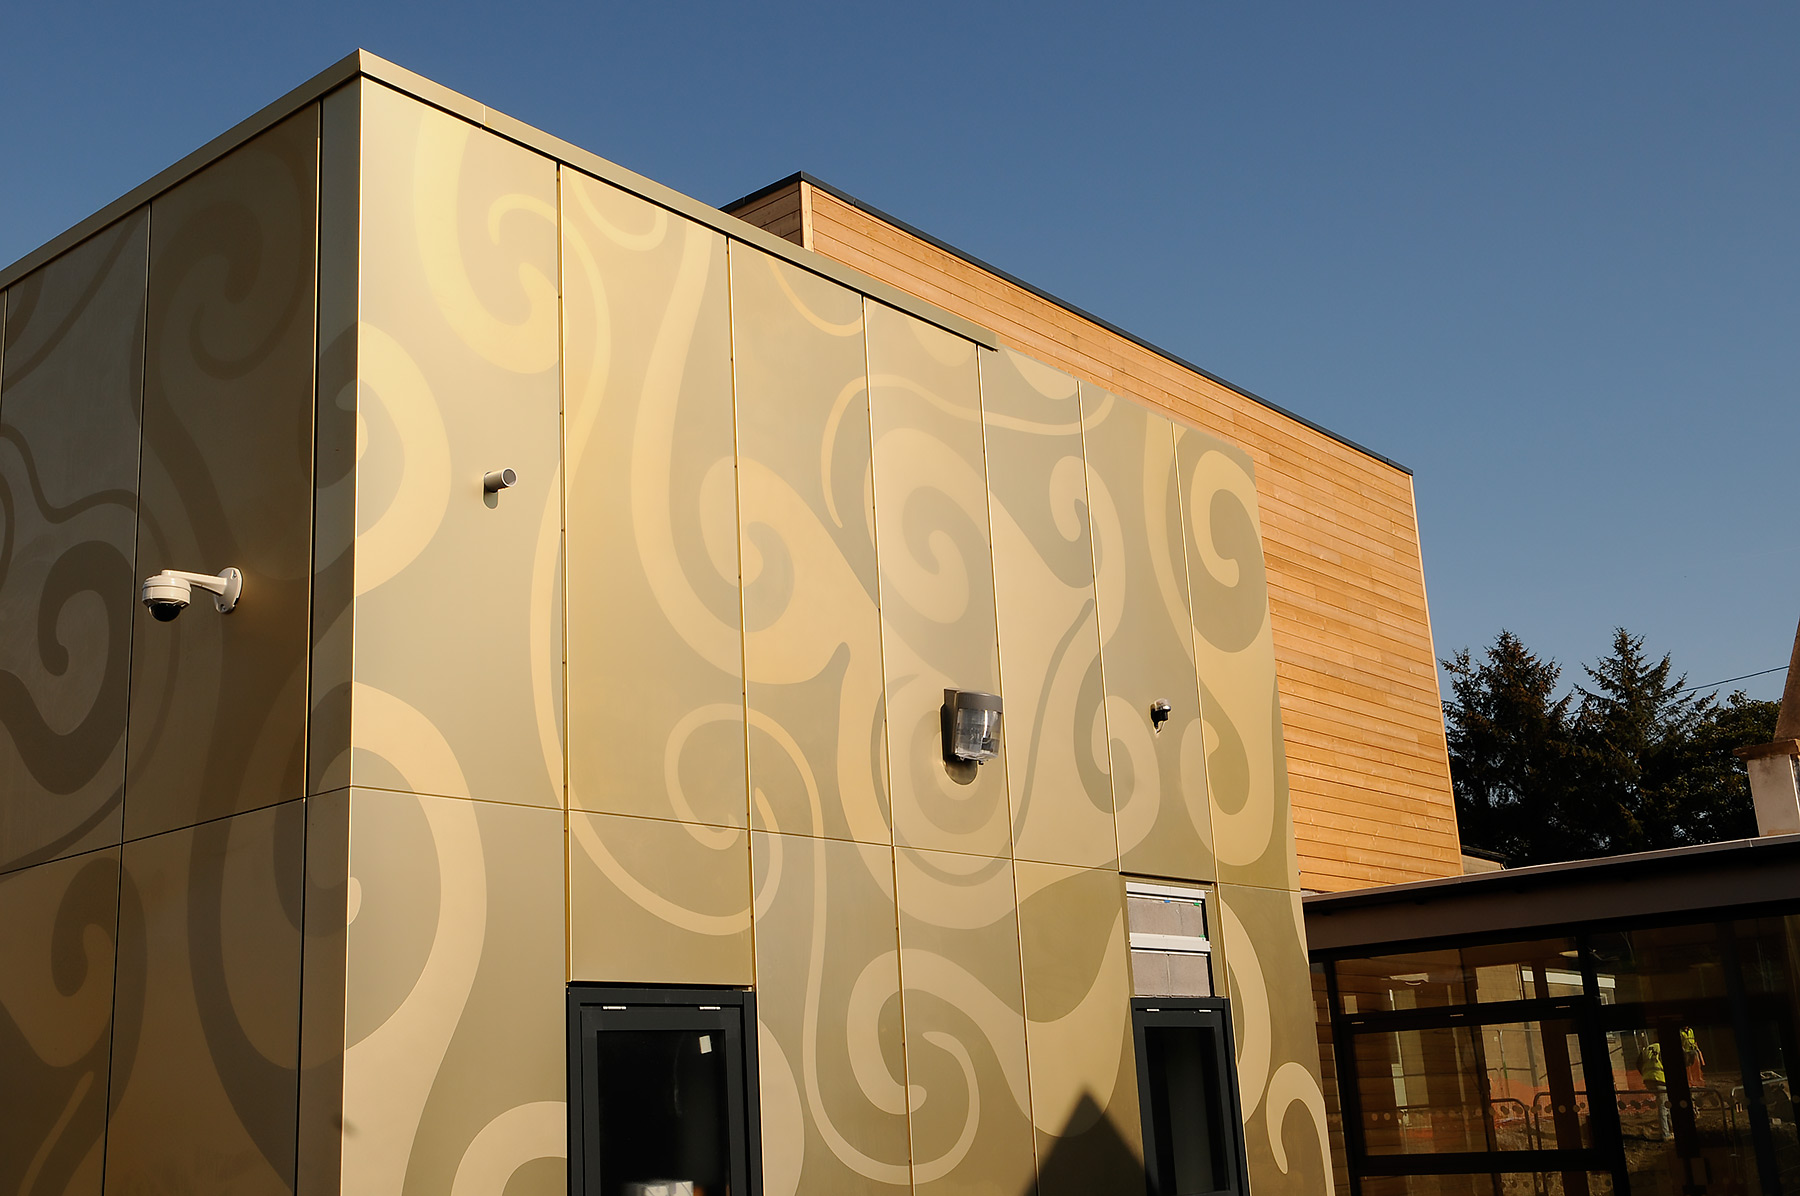 Etched anodised aluminium, school in Wales.